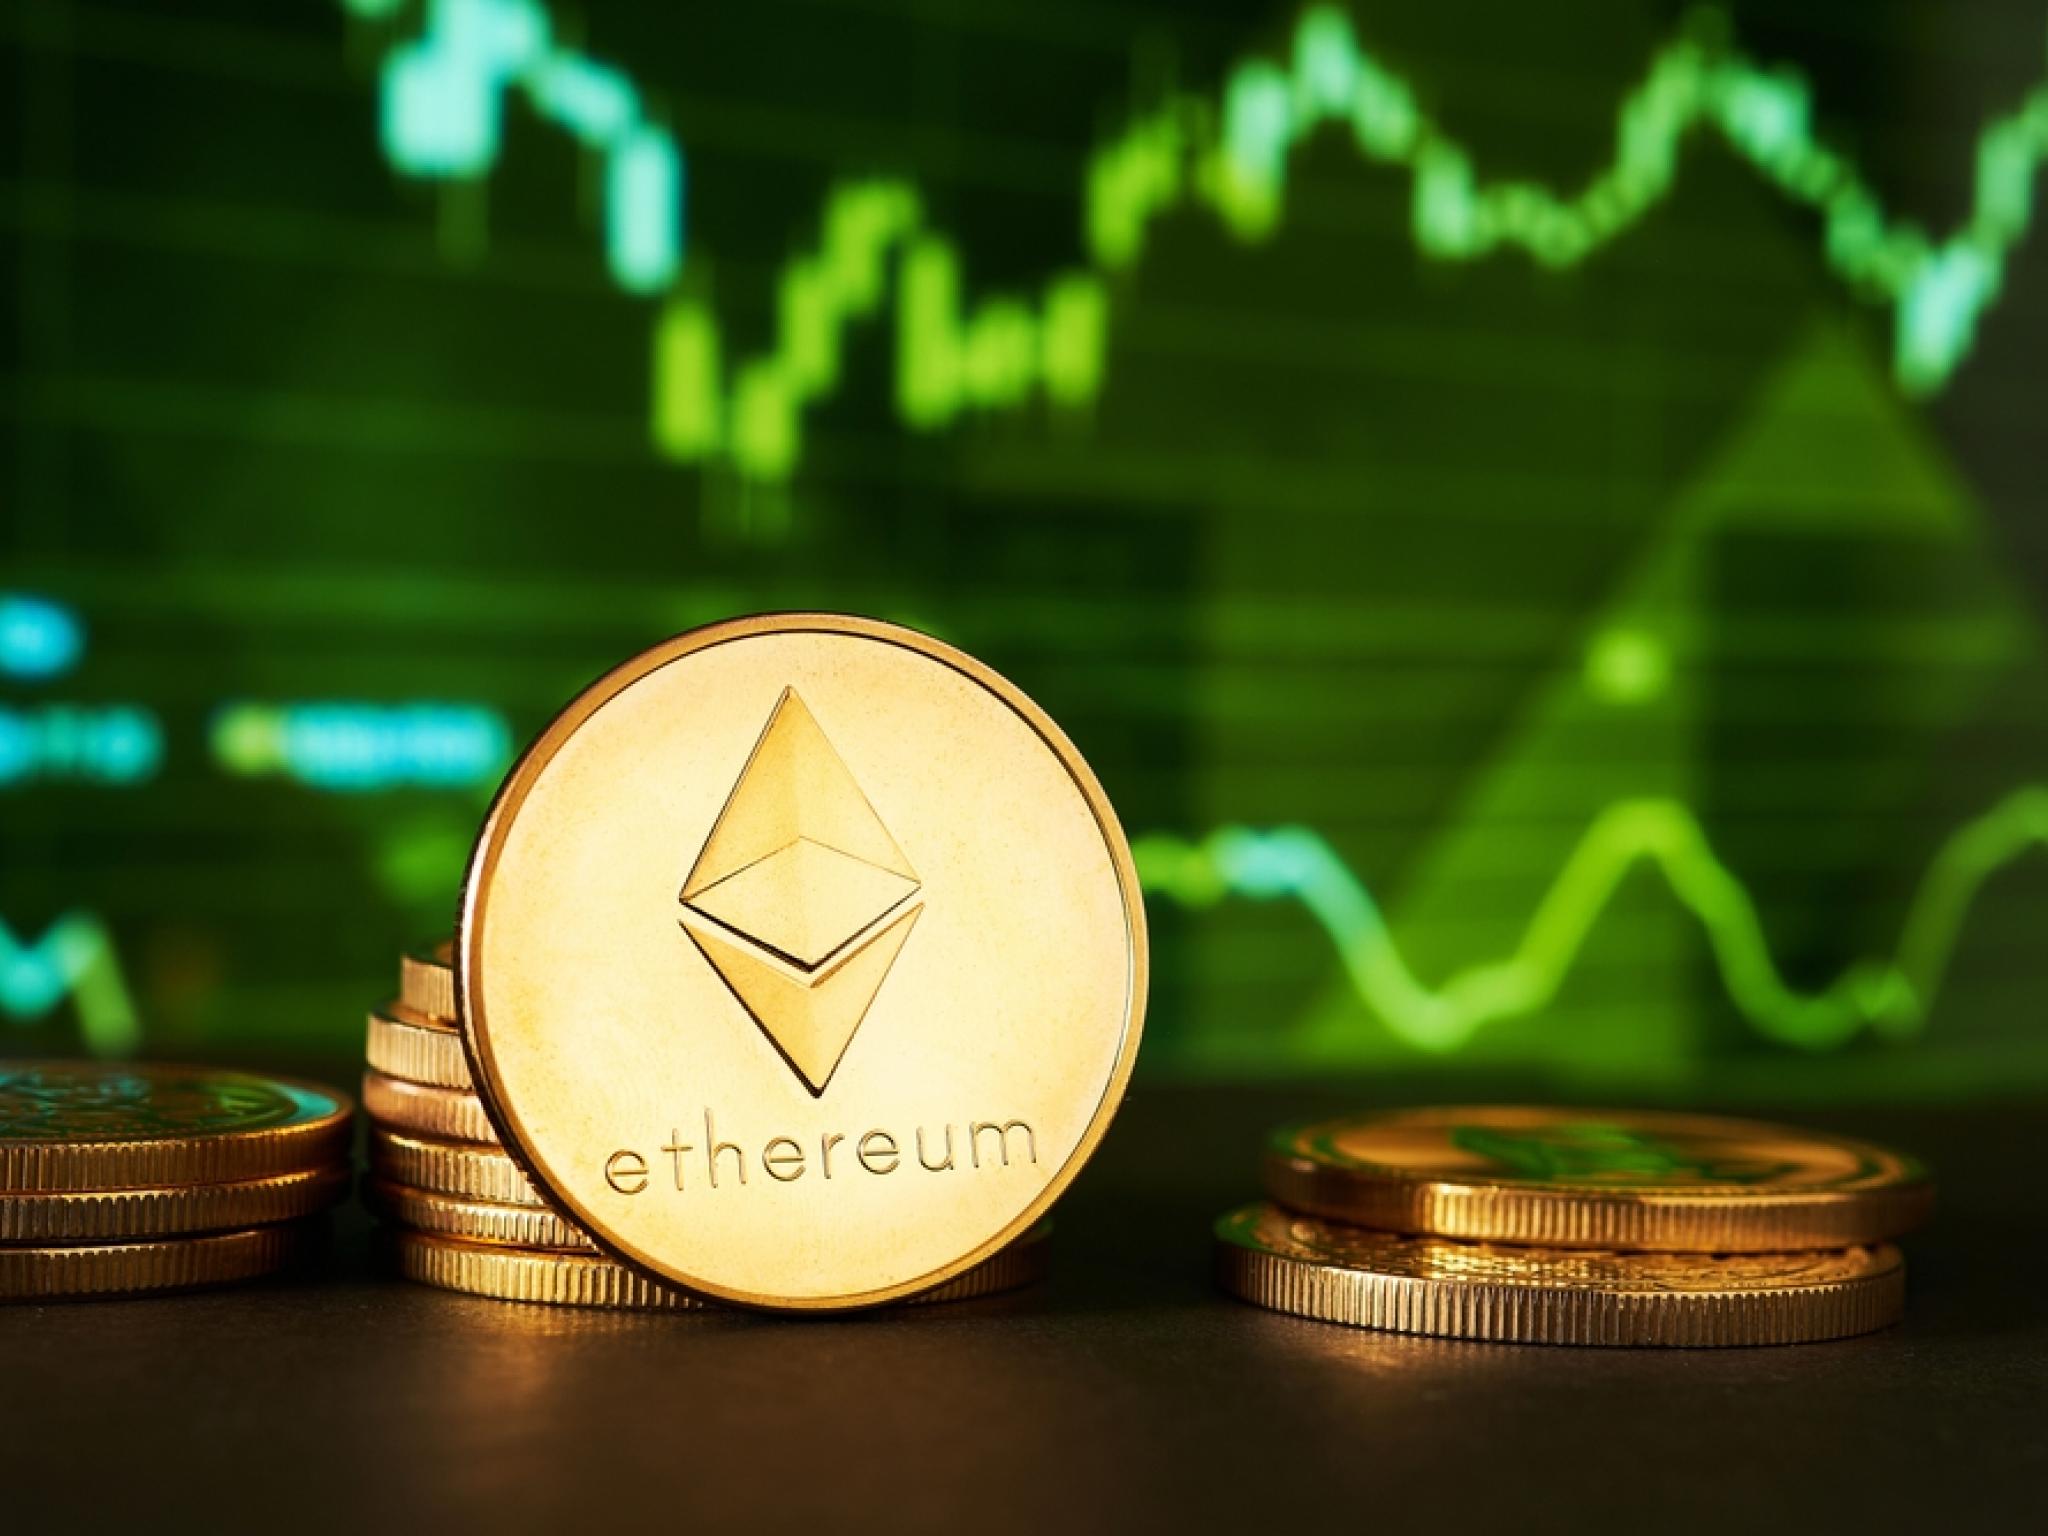  ethereum-prints-banana-zone-candle-with-largest-one-day-market-cap-gain-at-71b-following-potential-etf-approval 